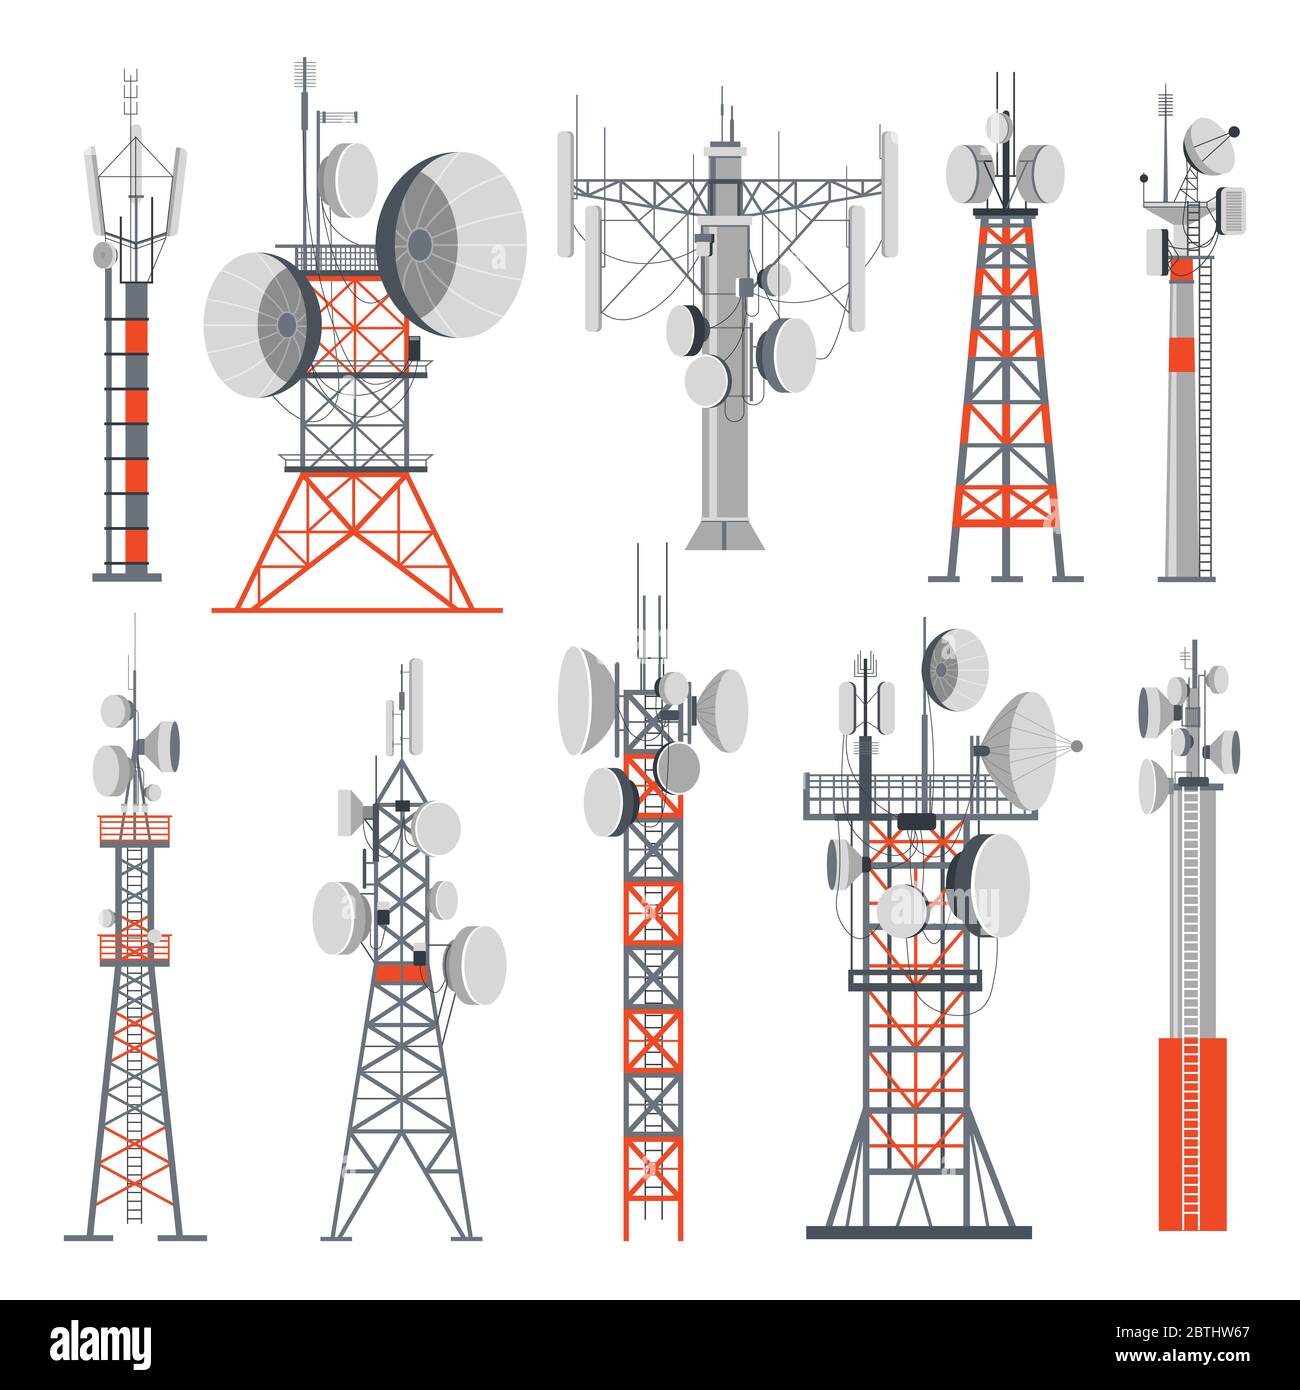 Towers and stations supplying electricity set of buildings Stock Vector